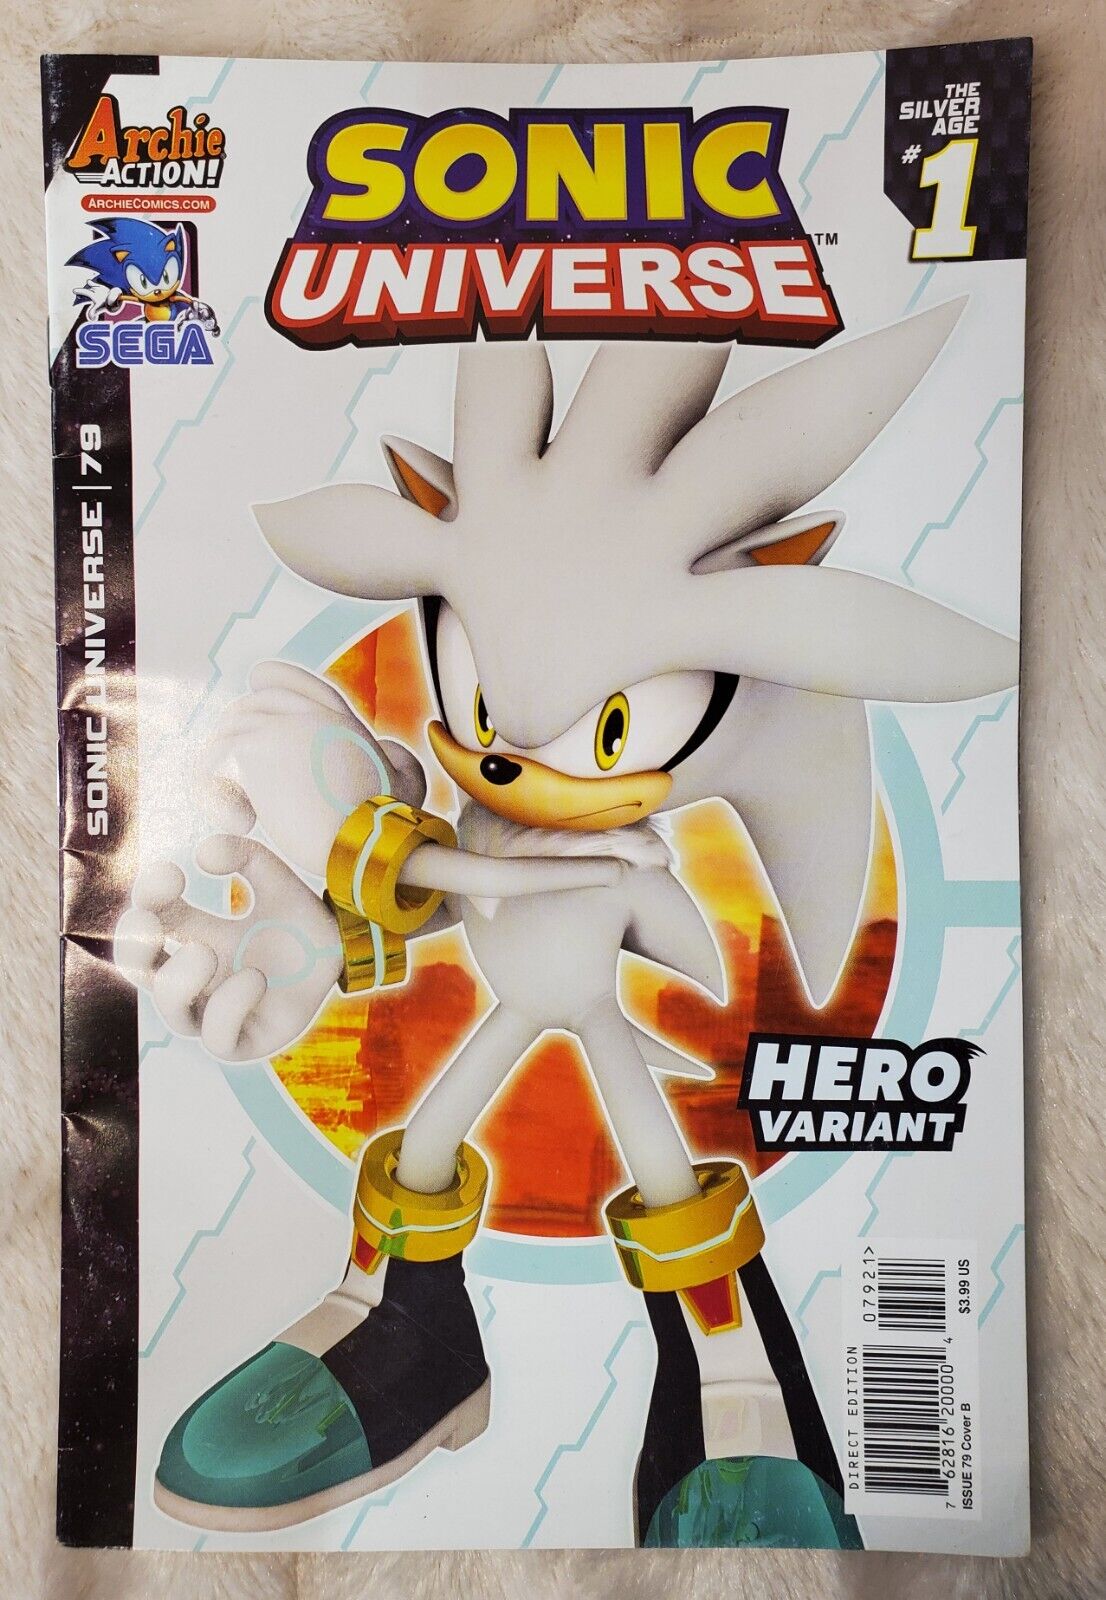 Sonic Universe #79 Archie ActionComic Book The Silver Age #1 2015 Rare